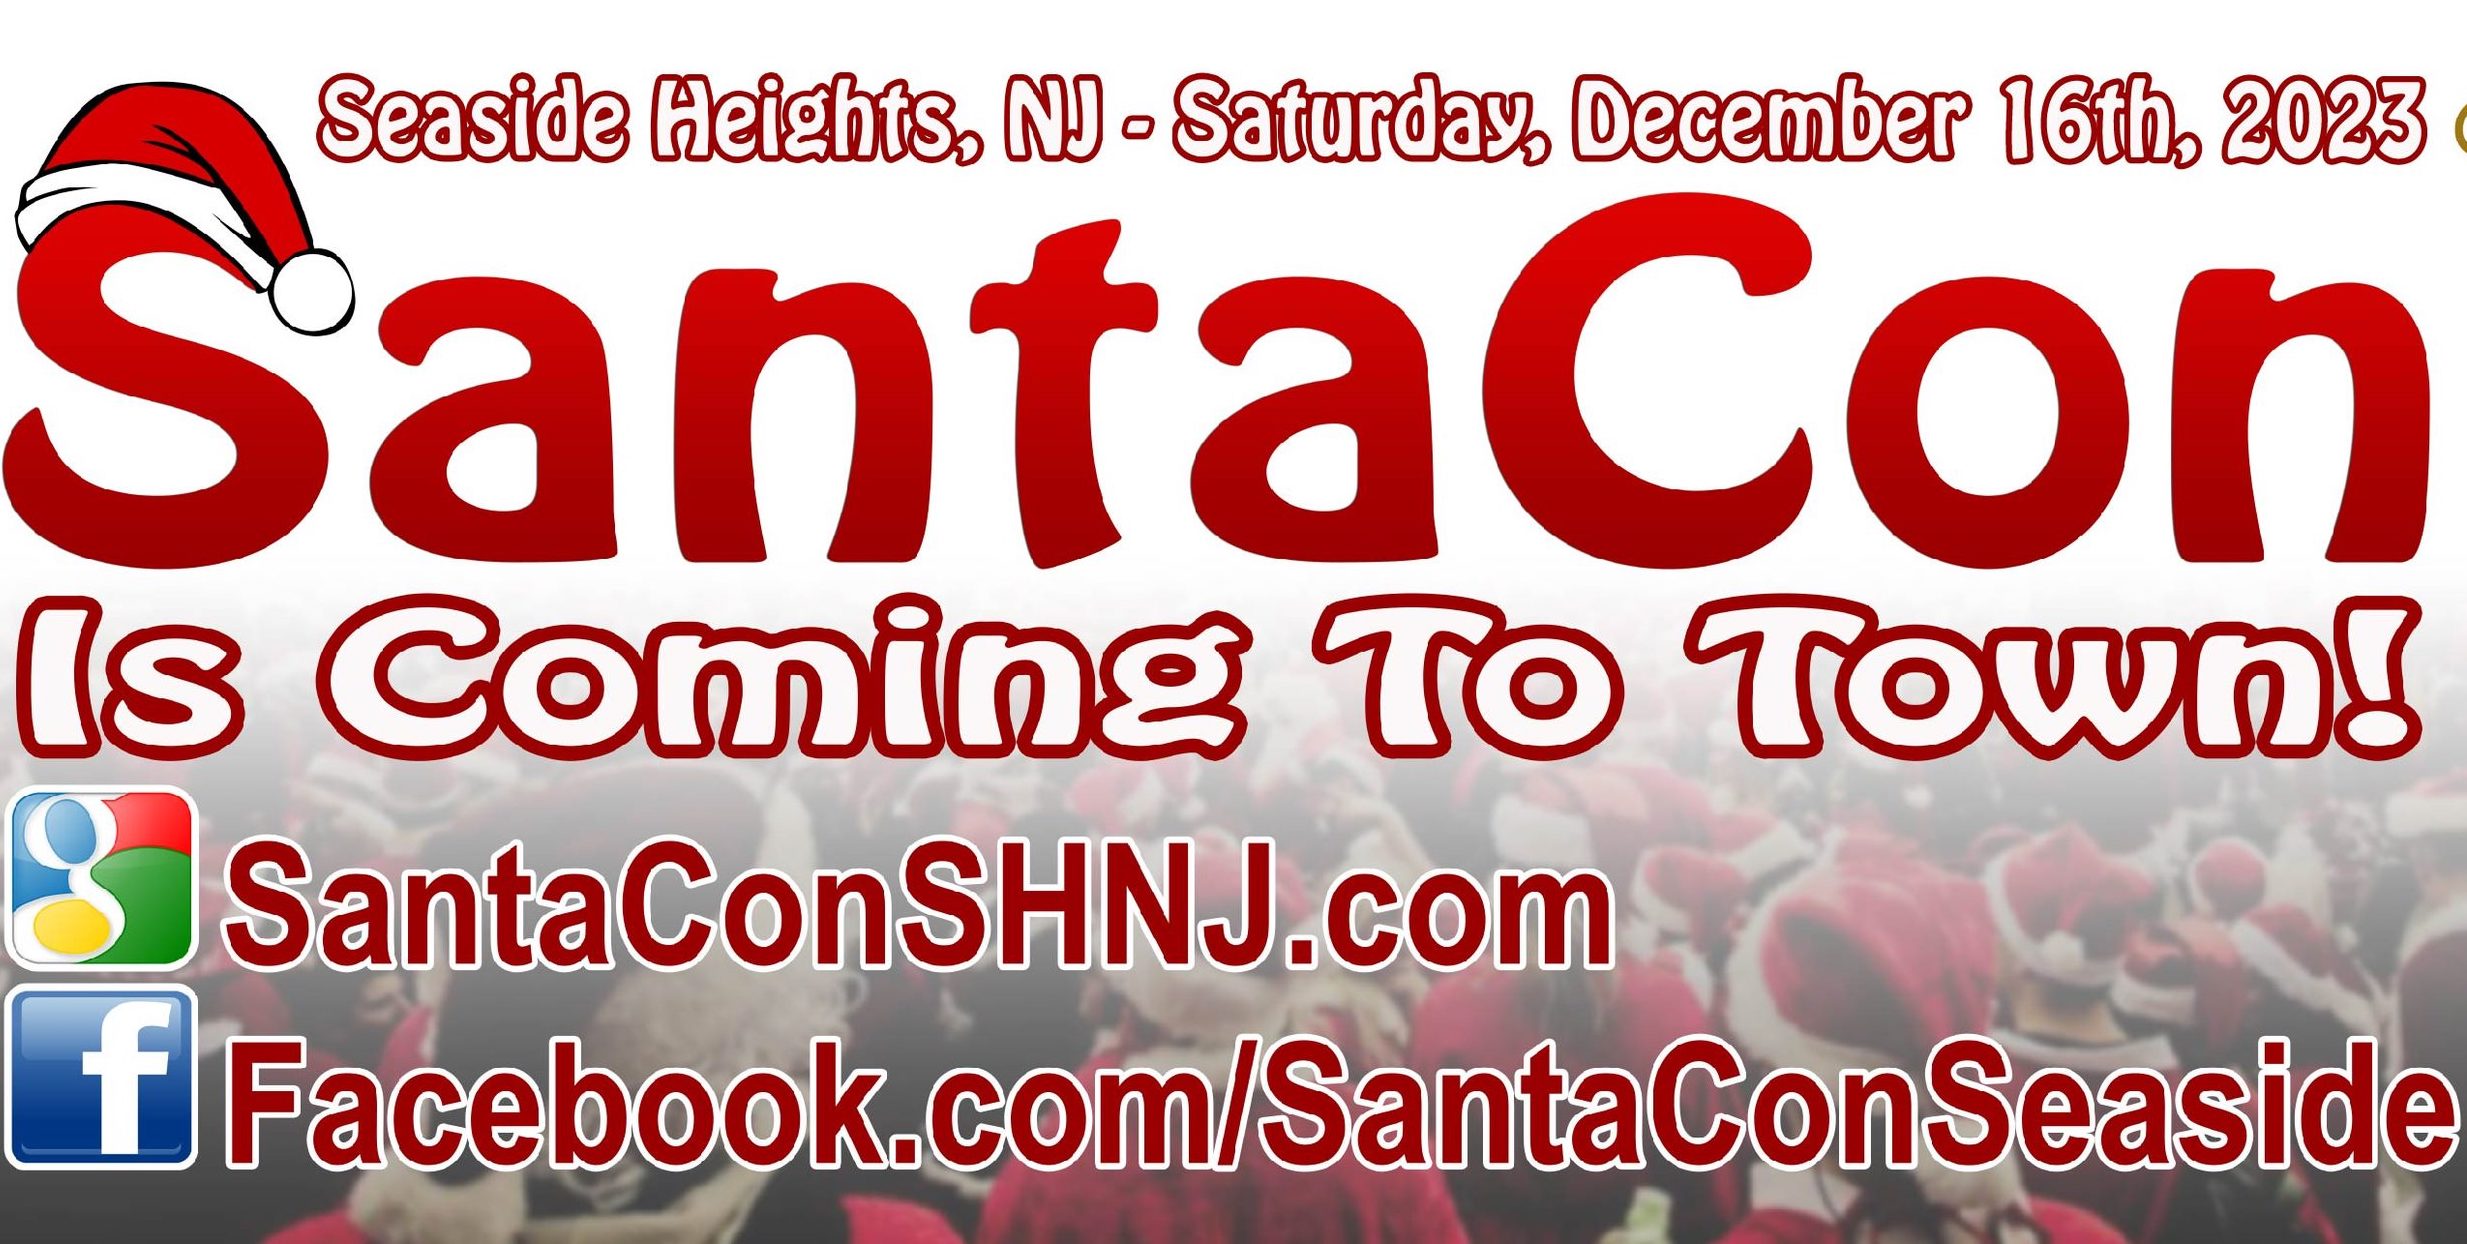 SantaCon Seaside Heights New Jersey Official Tourism Information Site